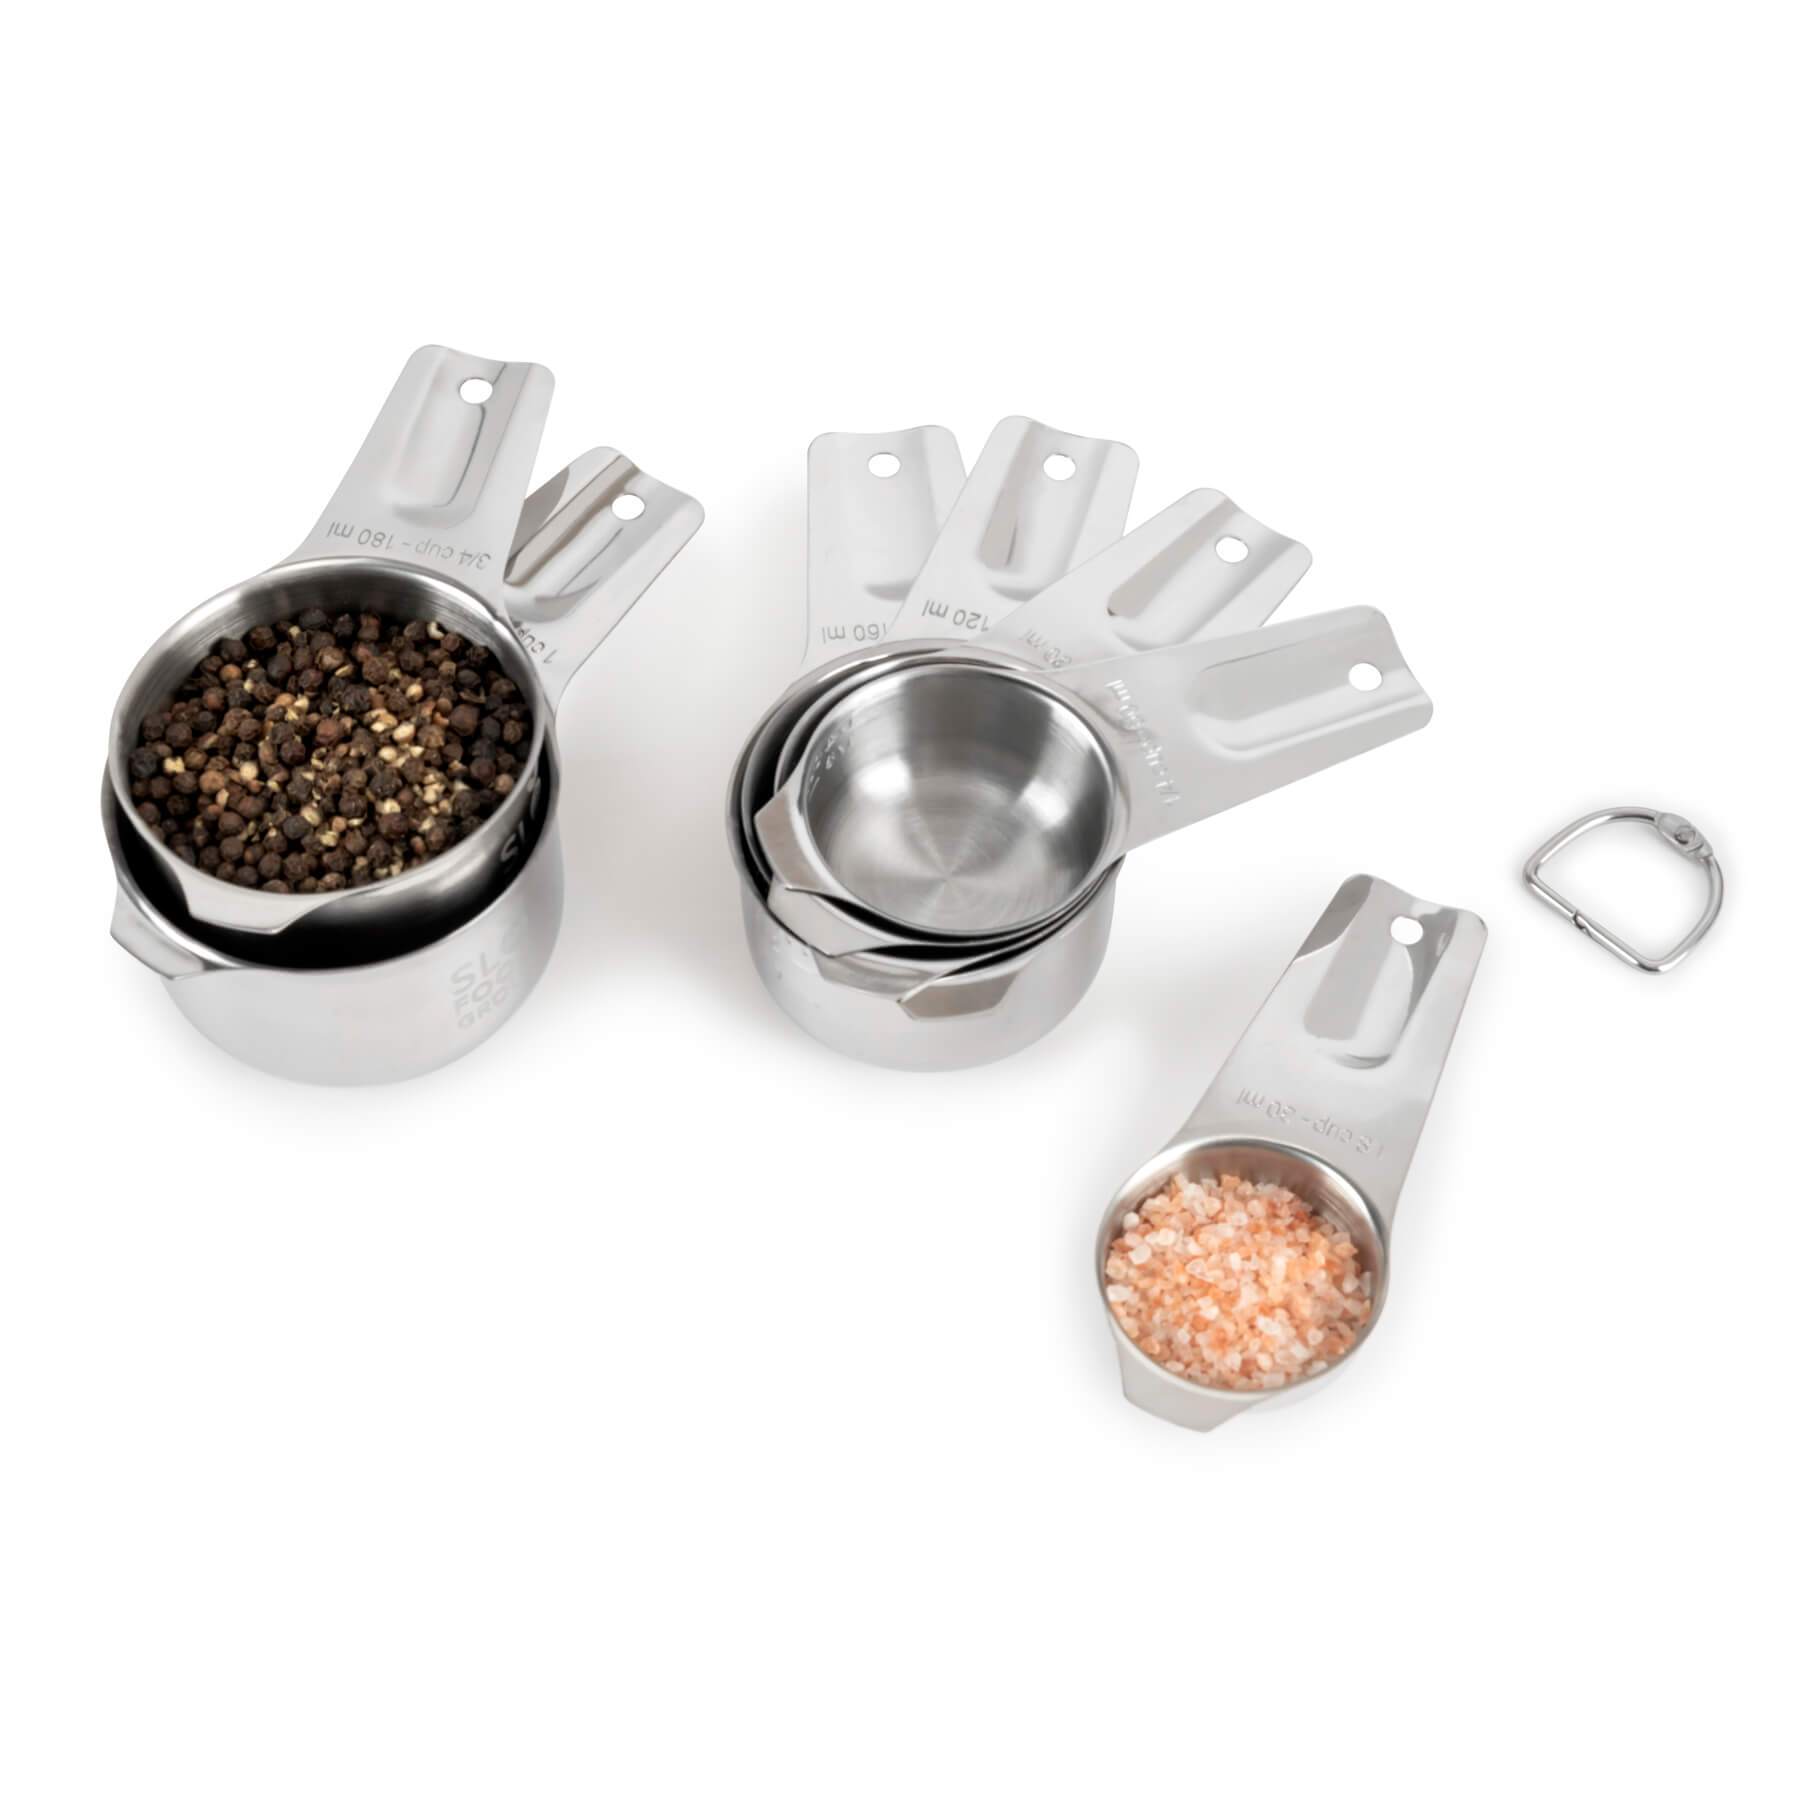 7 Pieces Stainless Steel Measuring Cup Set – Chef Pomodoro